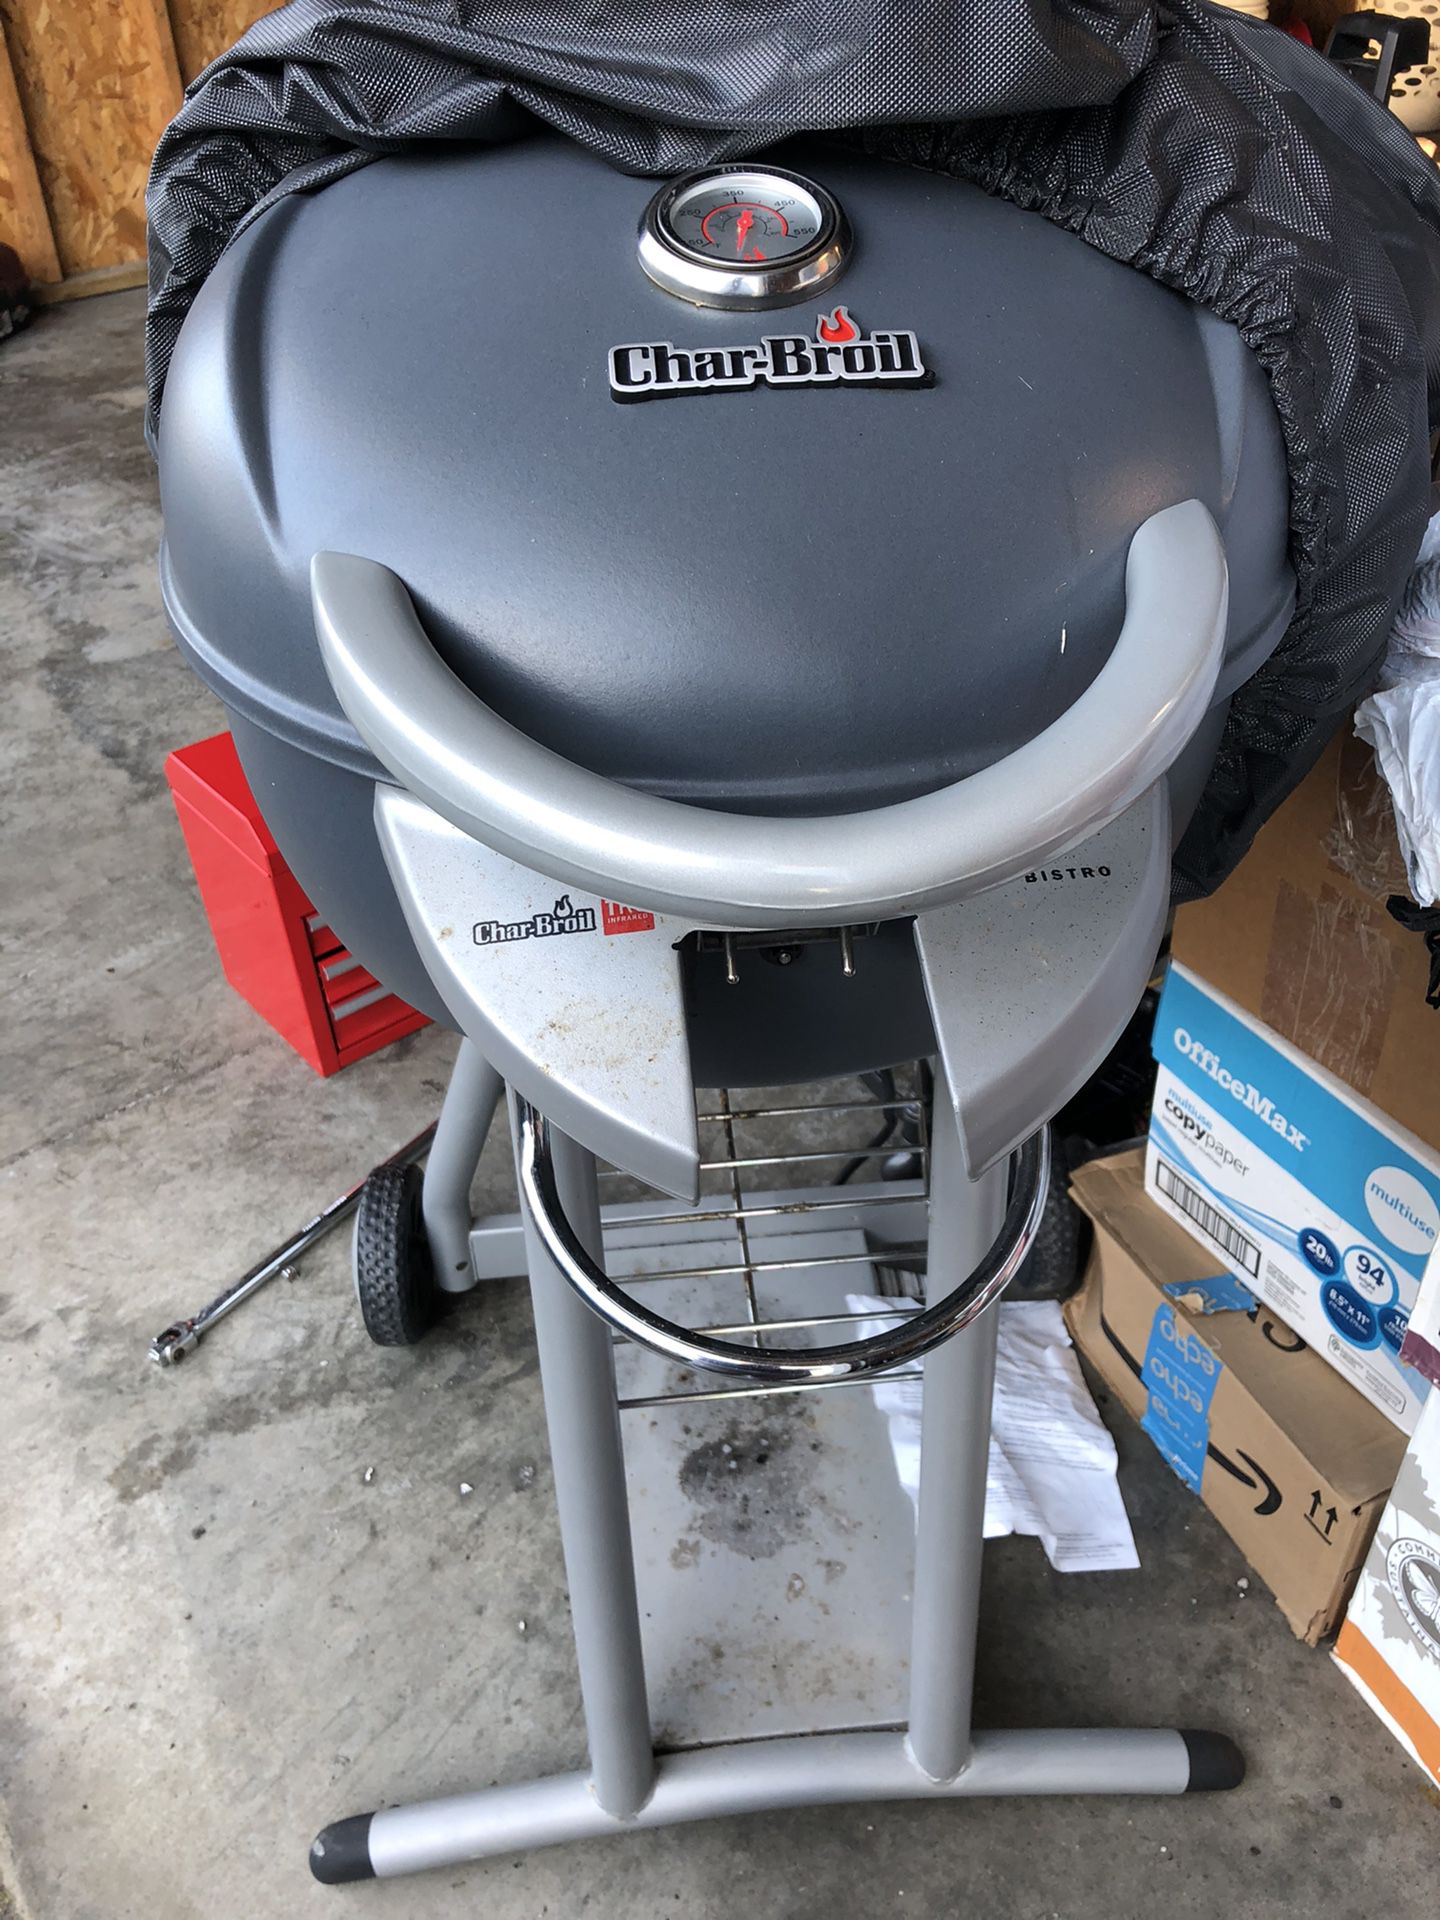 Char boil Electric grill